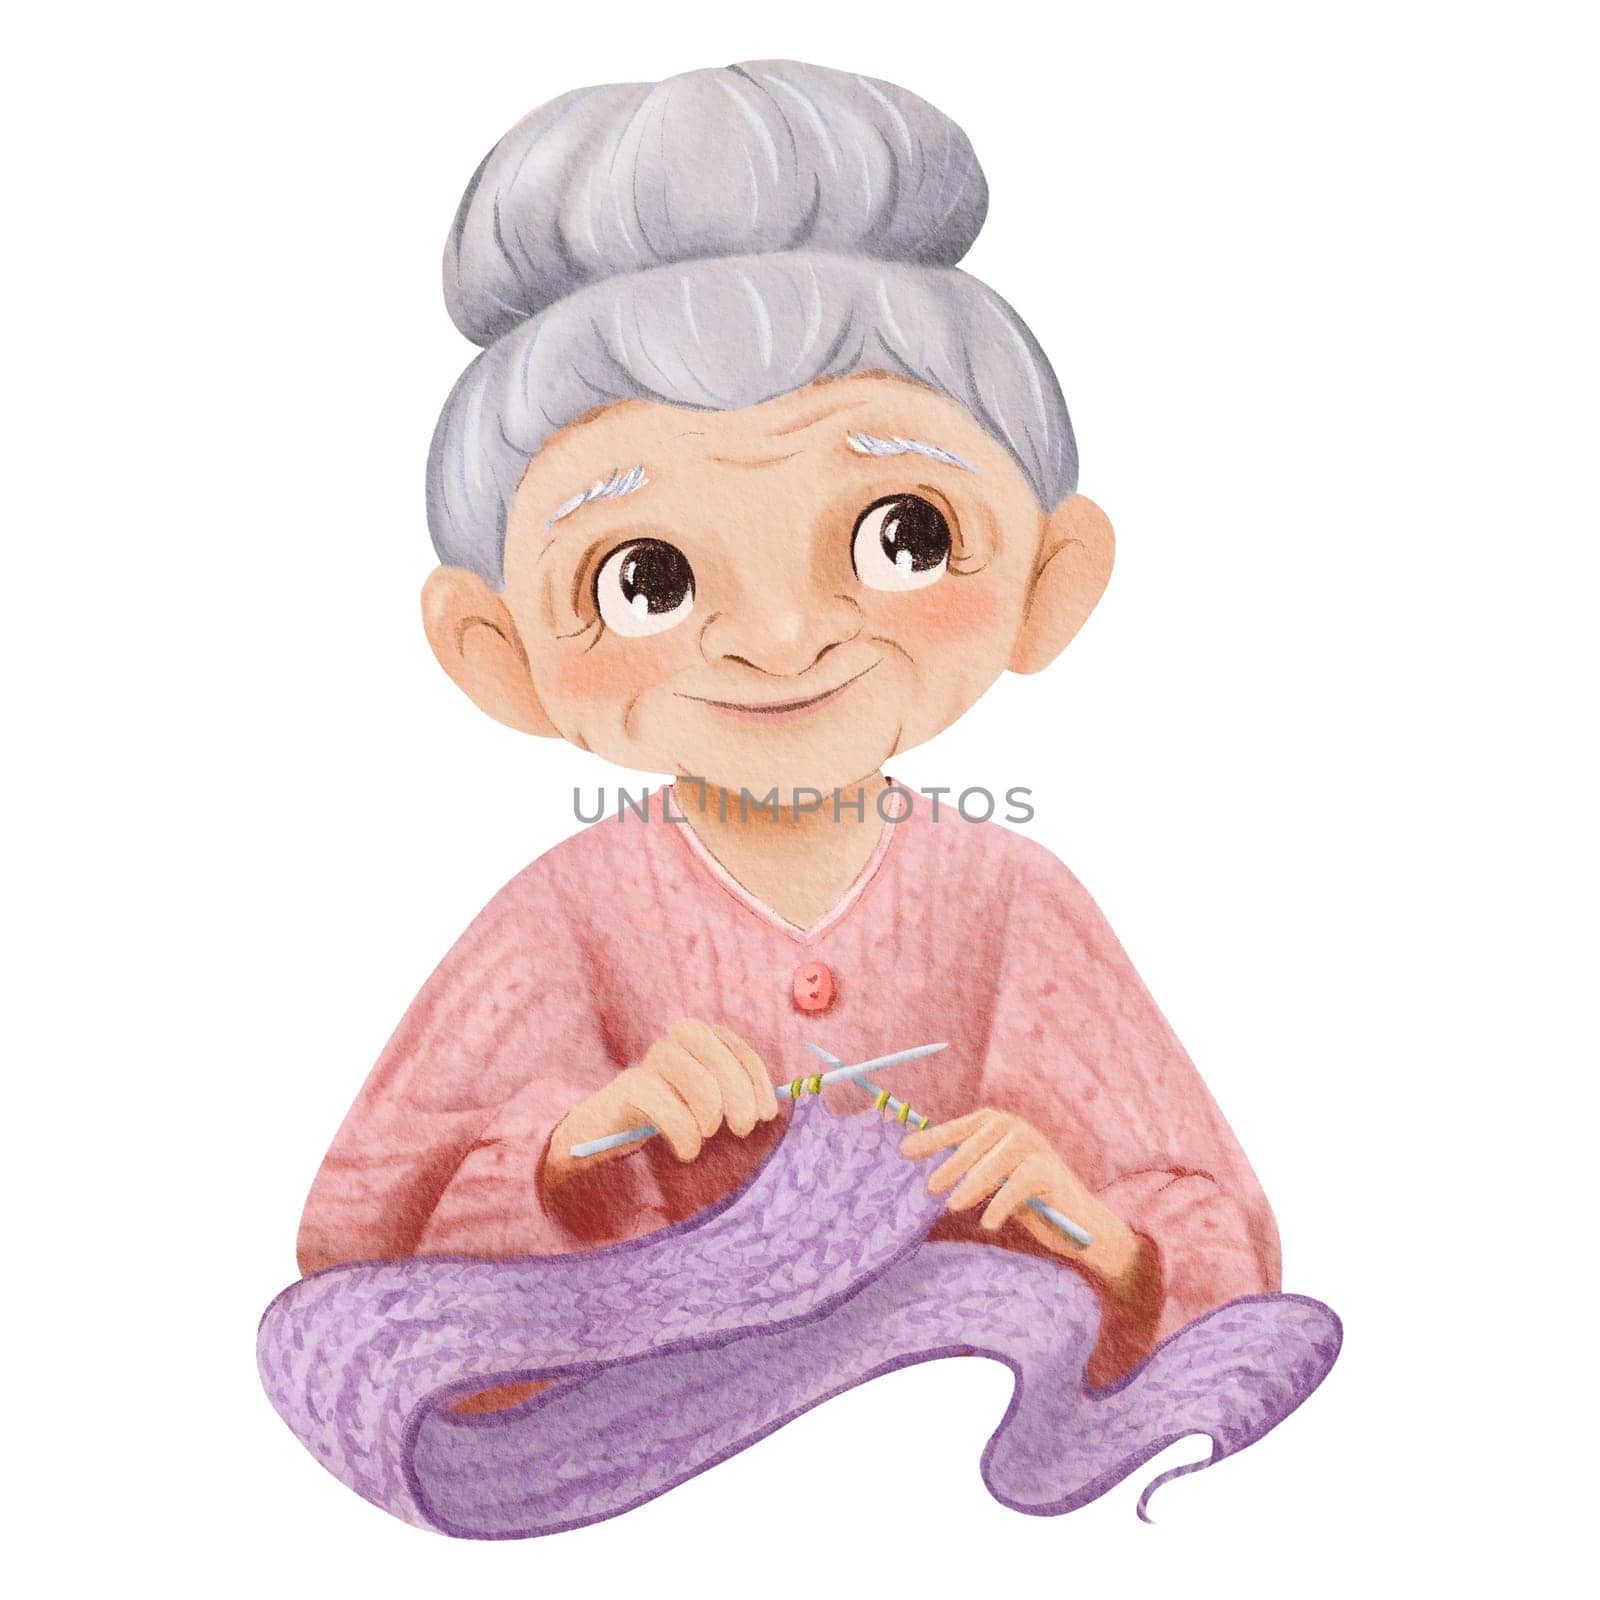 A watercolor children's illustration. a gray-haired grandmother knitting a scarf. hair in a bun and wears a pink sweater. a smiling woman engaged in knitting, for education or family-themed designs by Art_Mari_Ka